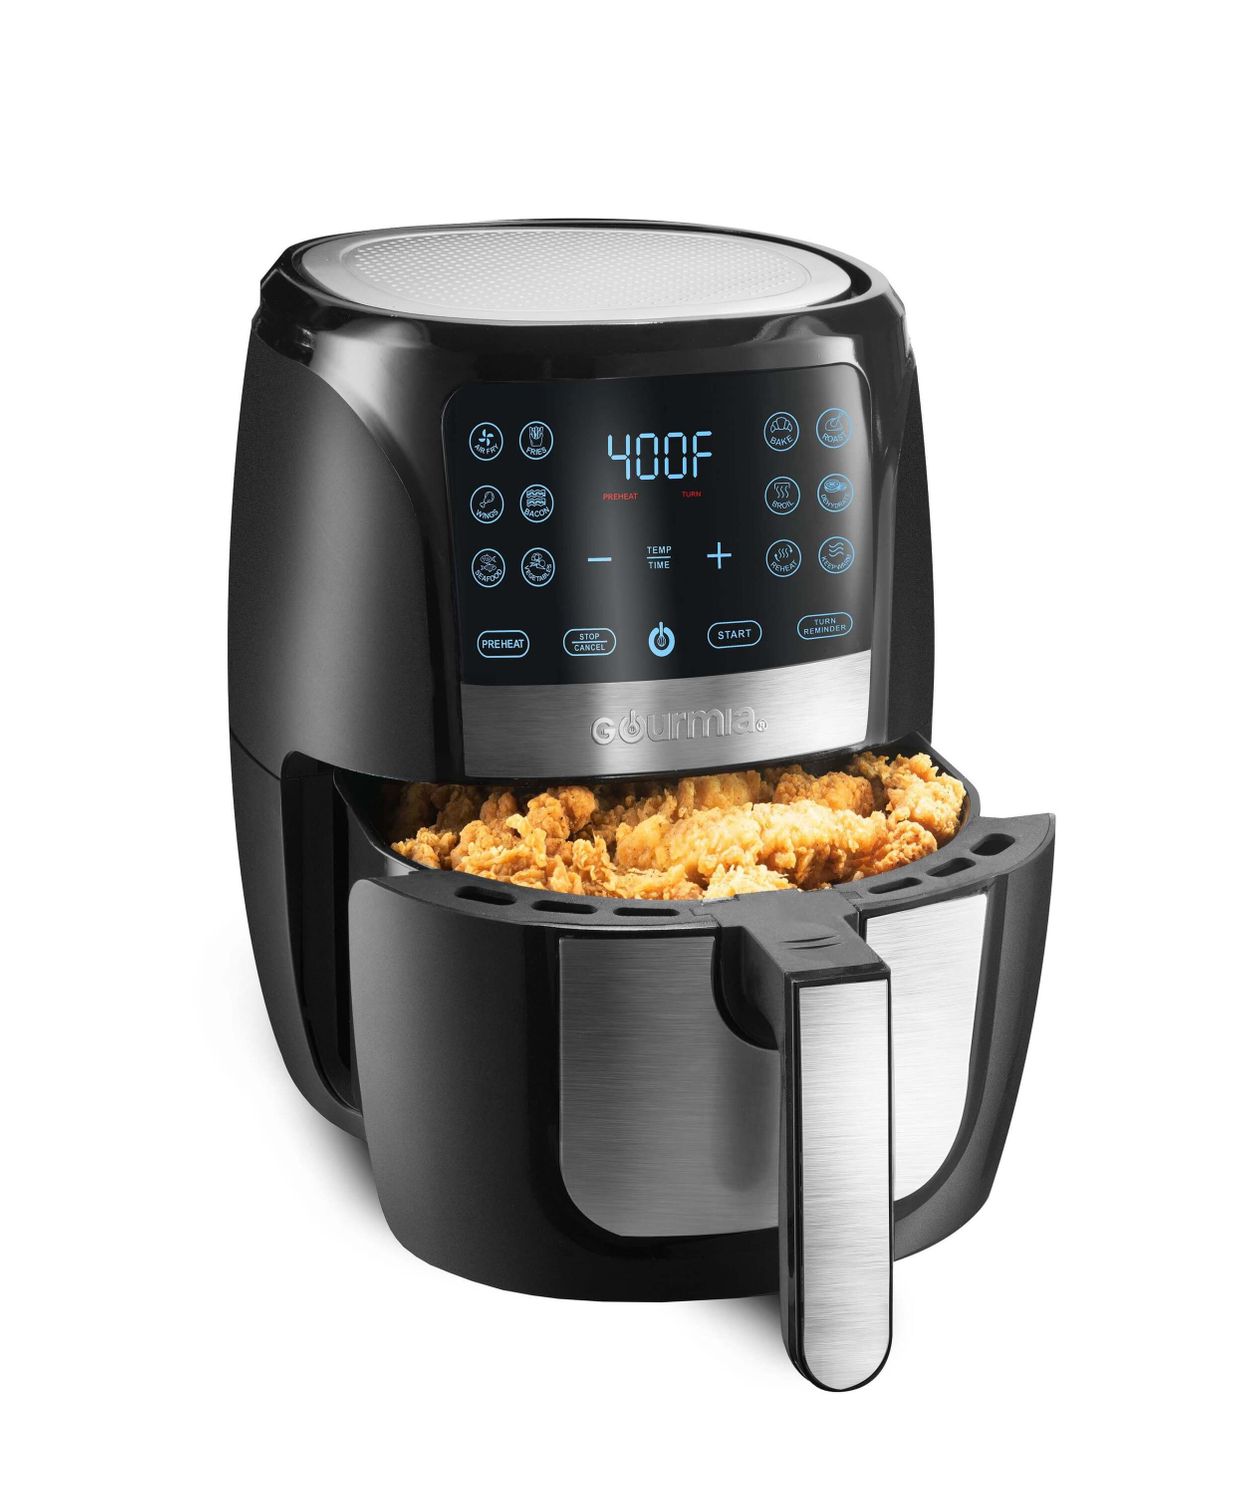 An image showing beautifully crispy fried chicken in the air fryer basket